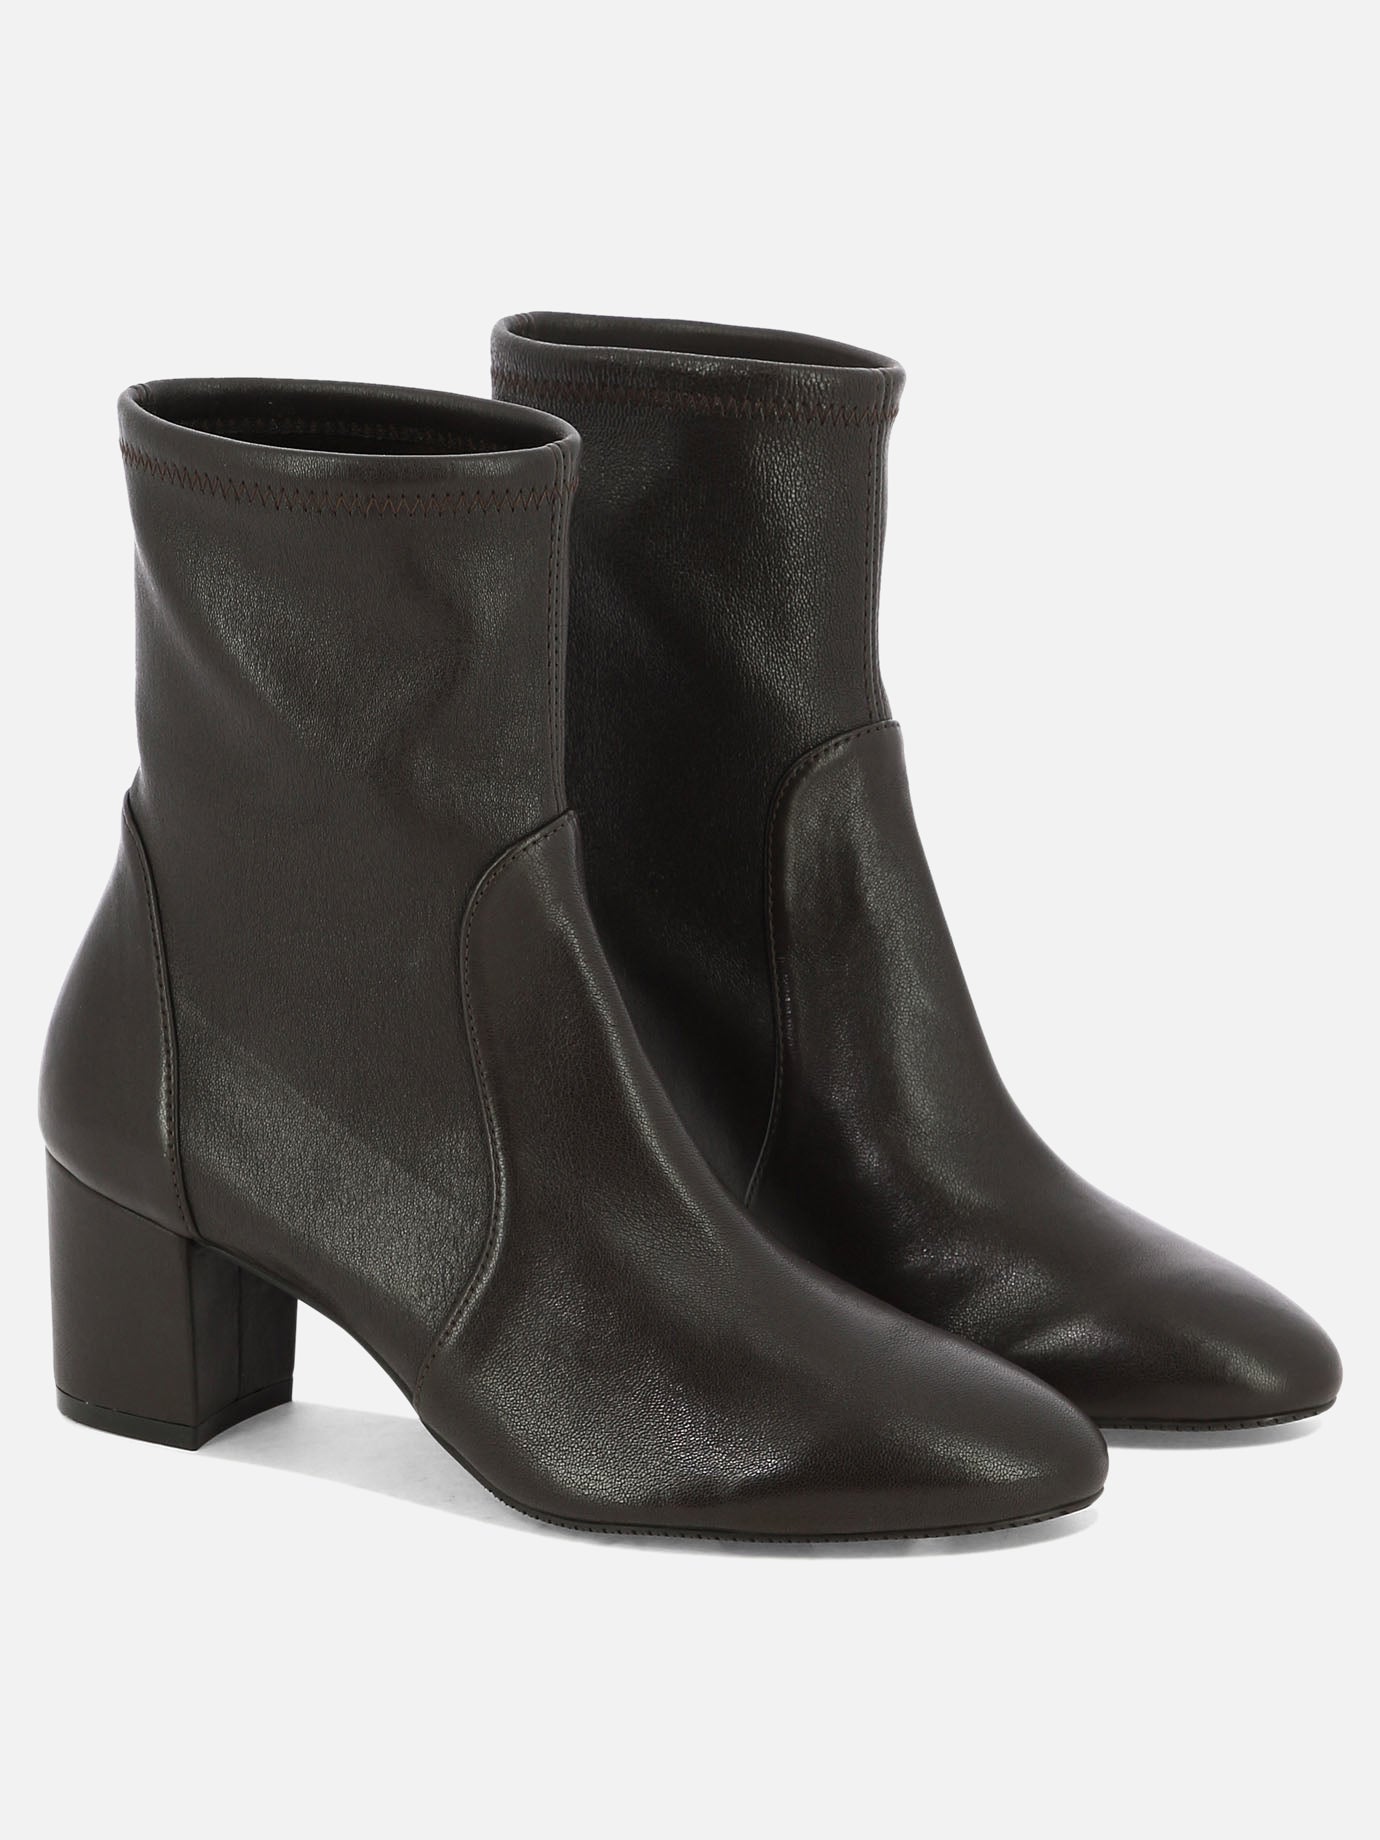 "Yuliana 60" ankle boots